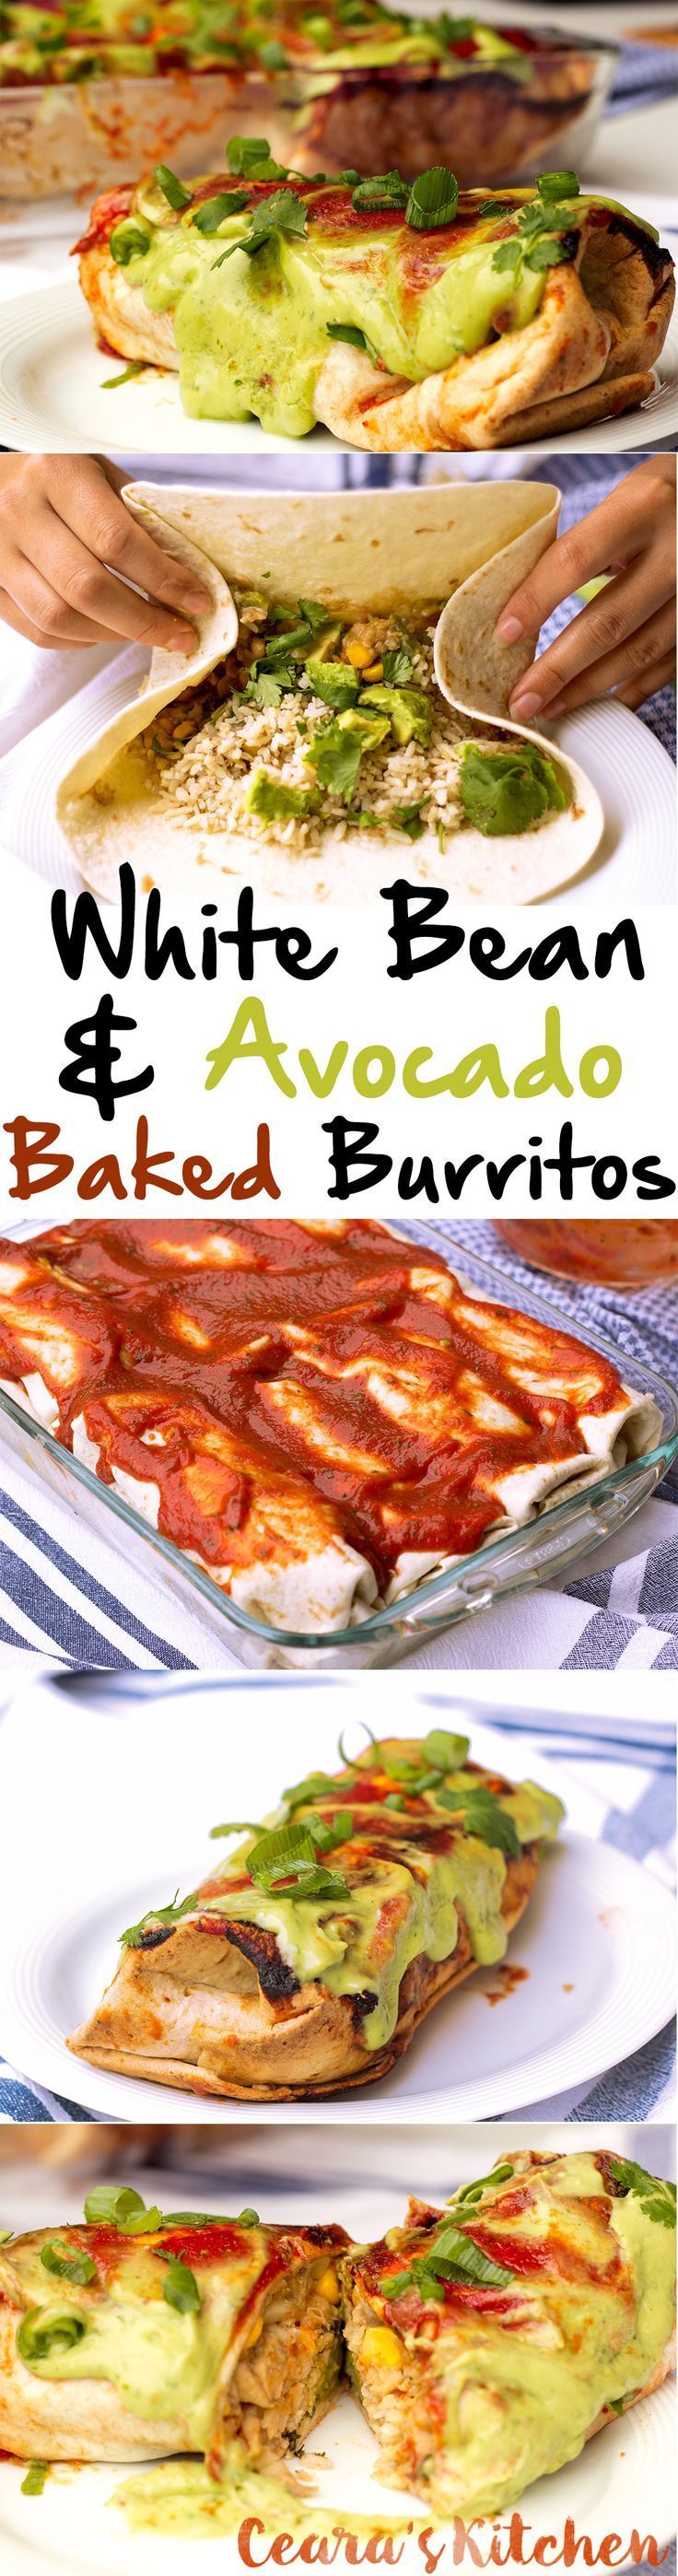 These White Bean and Avocado Baked Burritos make the perfect dinner – stuffed with white bean, mushrooms, corn lots of avocado!